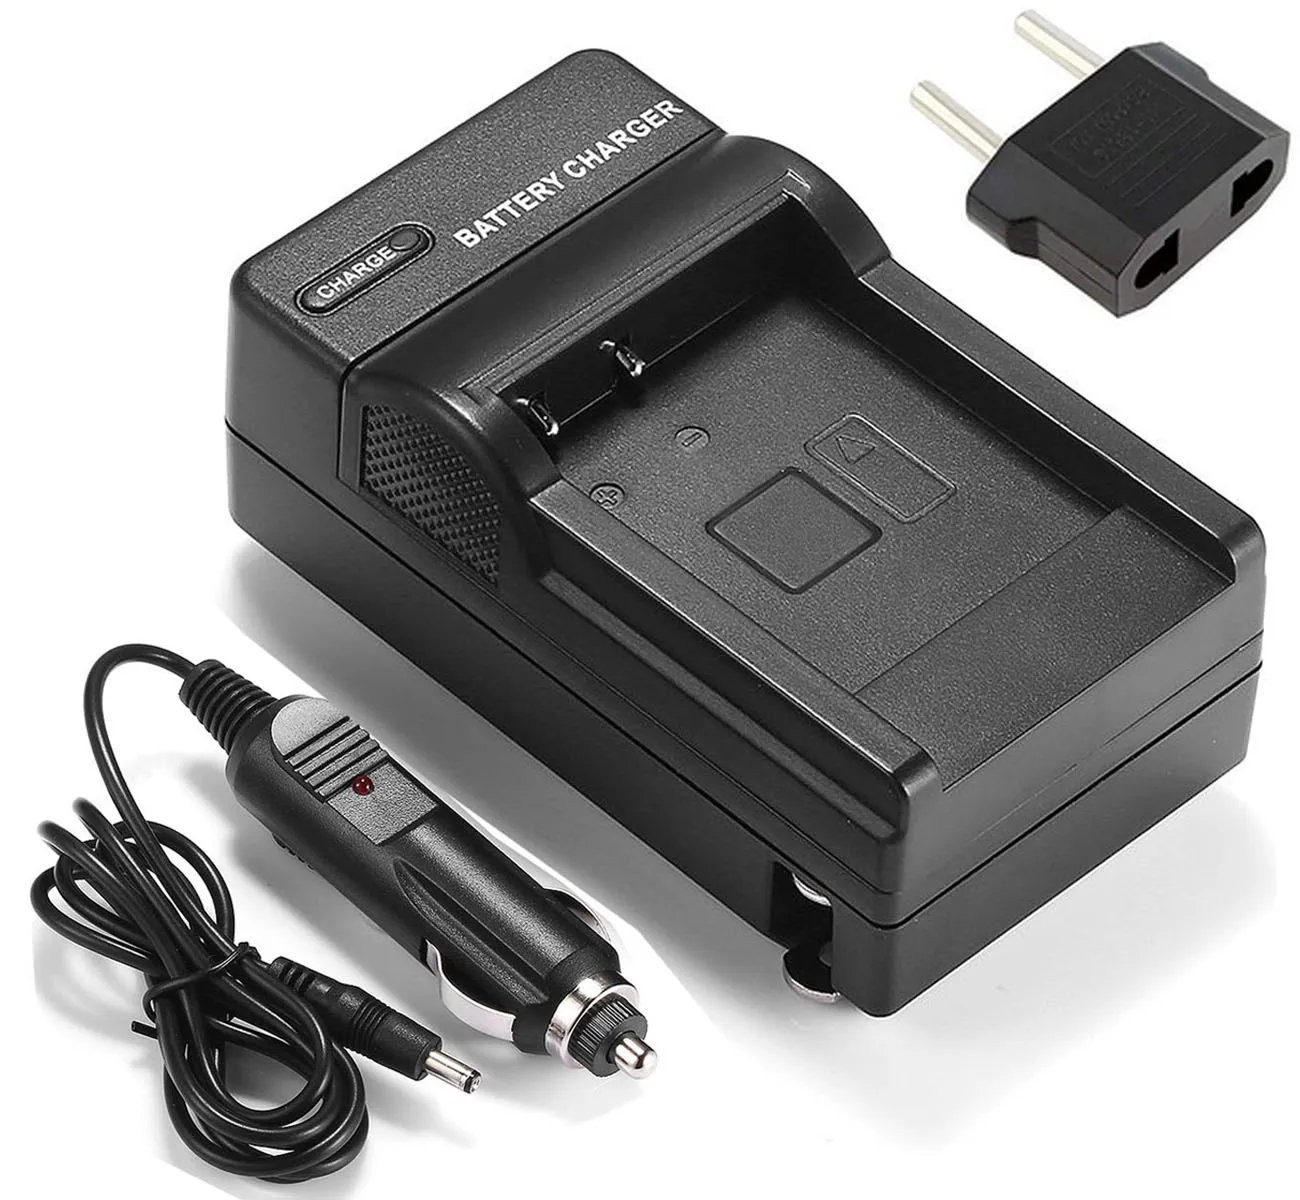 Battery Charger for Fujifilm FinePix HS30EXR, HS33EXR, HS35EXR, HS50EXR, HS30, HS33, HS35, HS50 EXR Digital Camera